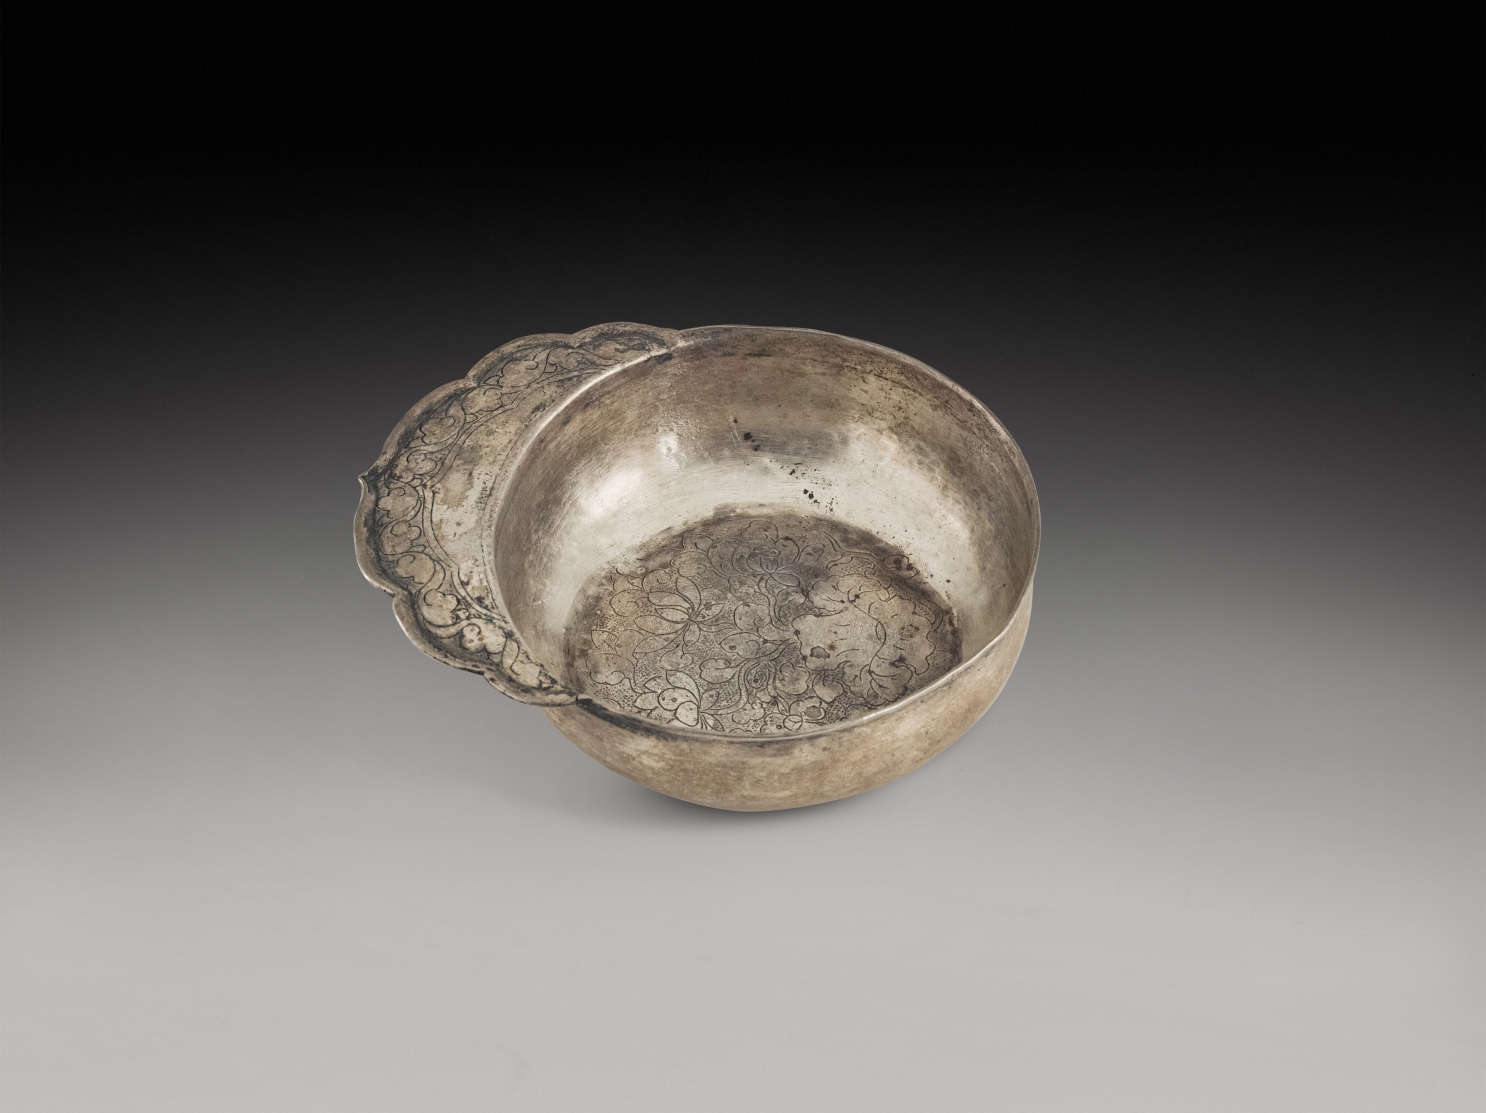 An engraved silver handled cup, Northern Song dynasty | 北宋 銀單把盃 - Image 3 of 5